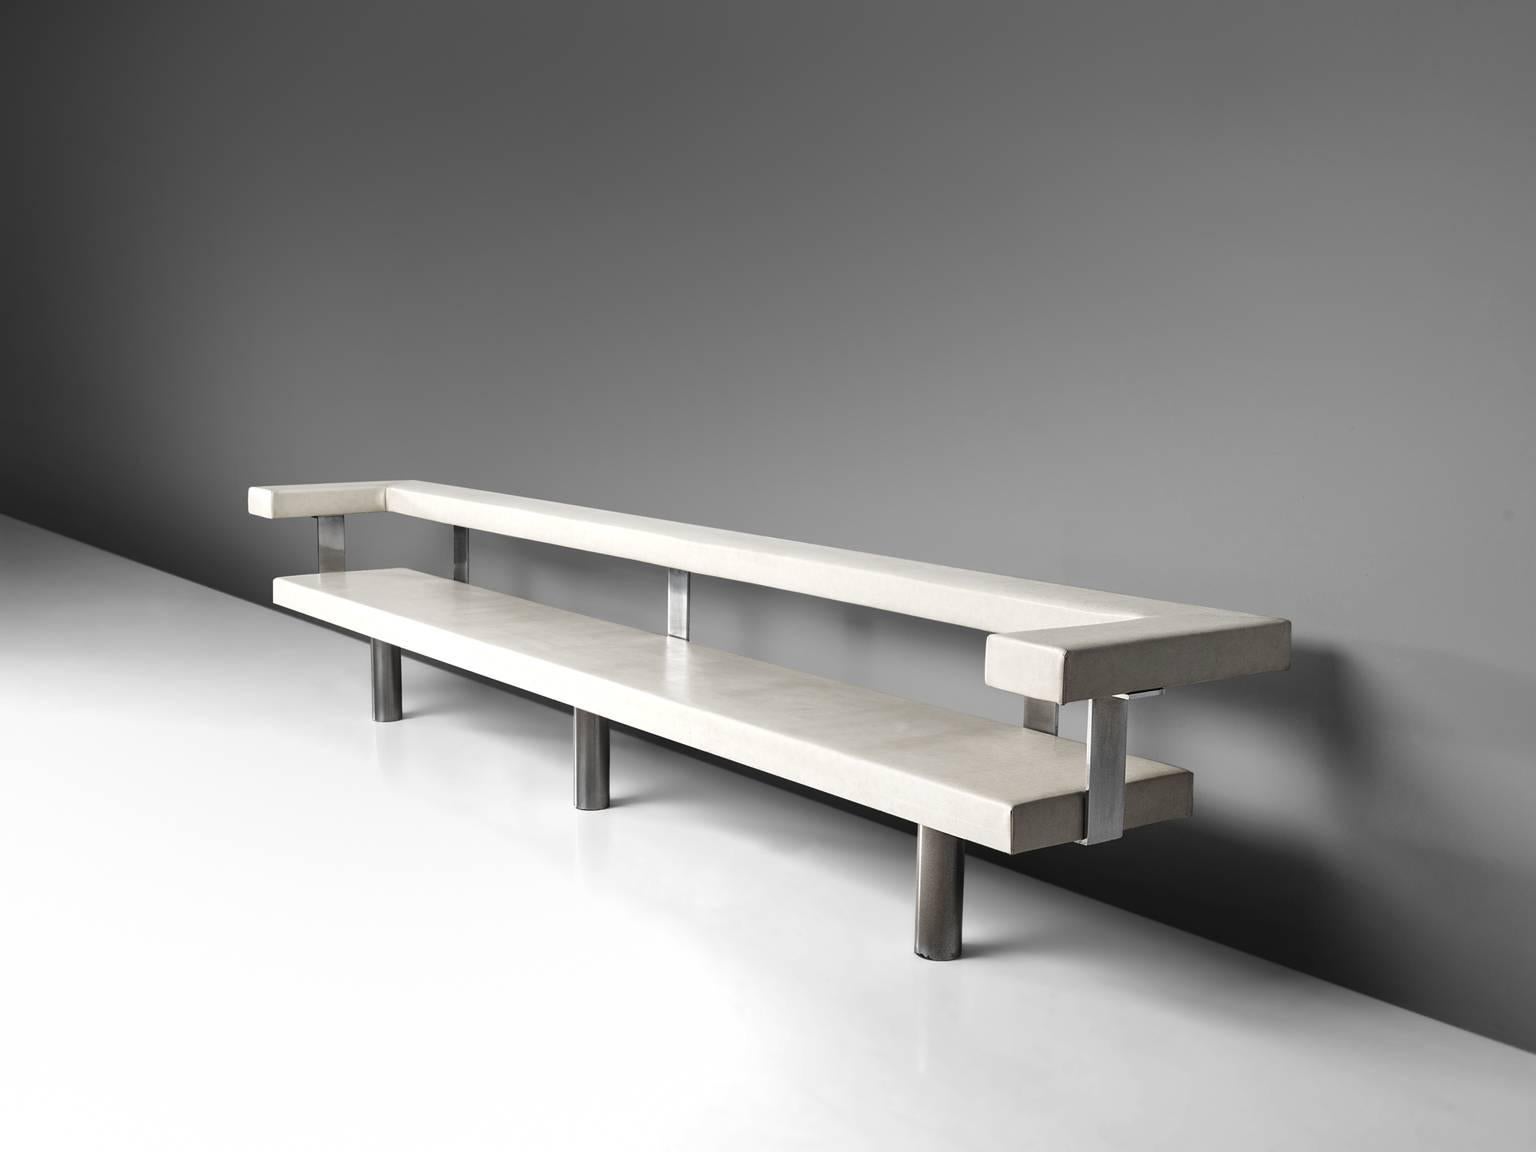 G.W. Rietveld and interior designer J. Tricht, bench, white faux leather and metal, the Netherlands, 1965.

This sofa was originally designed as a 'hall bench' function for a local bank in Dedemsvaart, the Netherlands. J. Tricht was the interior